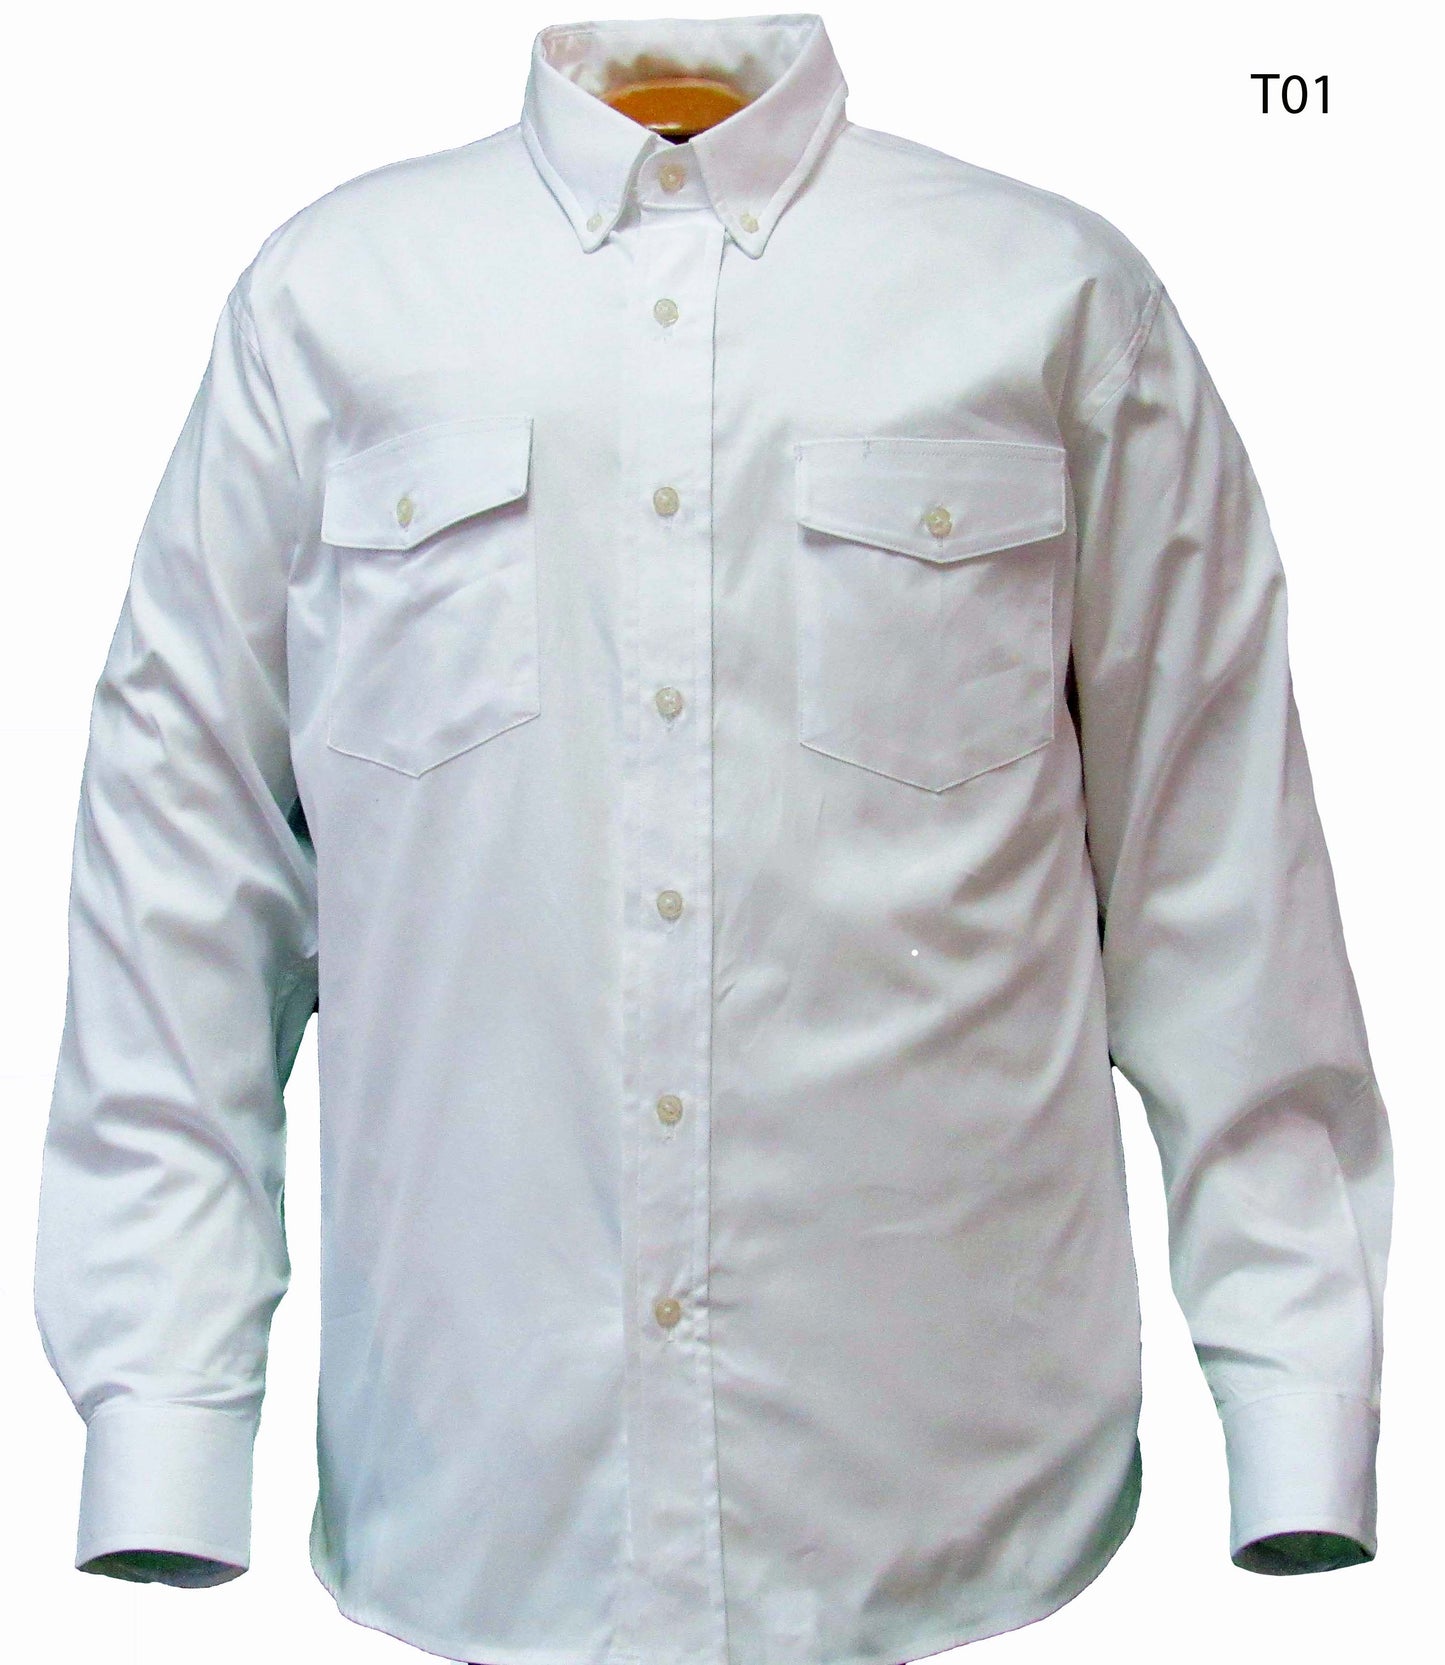 Factory Seconds - Slightly Irregular Shirts - Size 4X Large or 4XLT - 20.5 - From $24.95